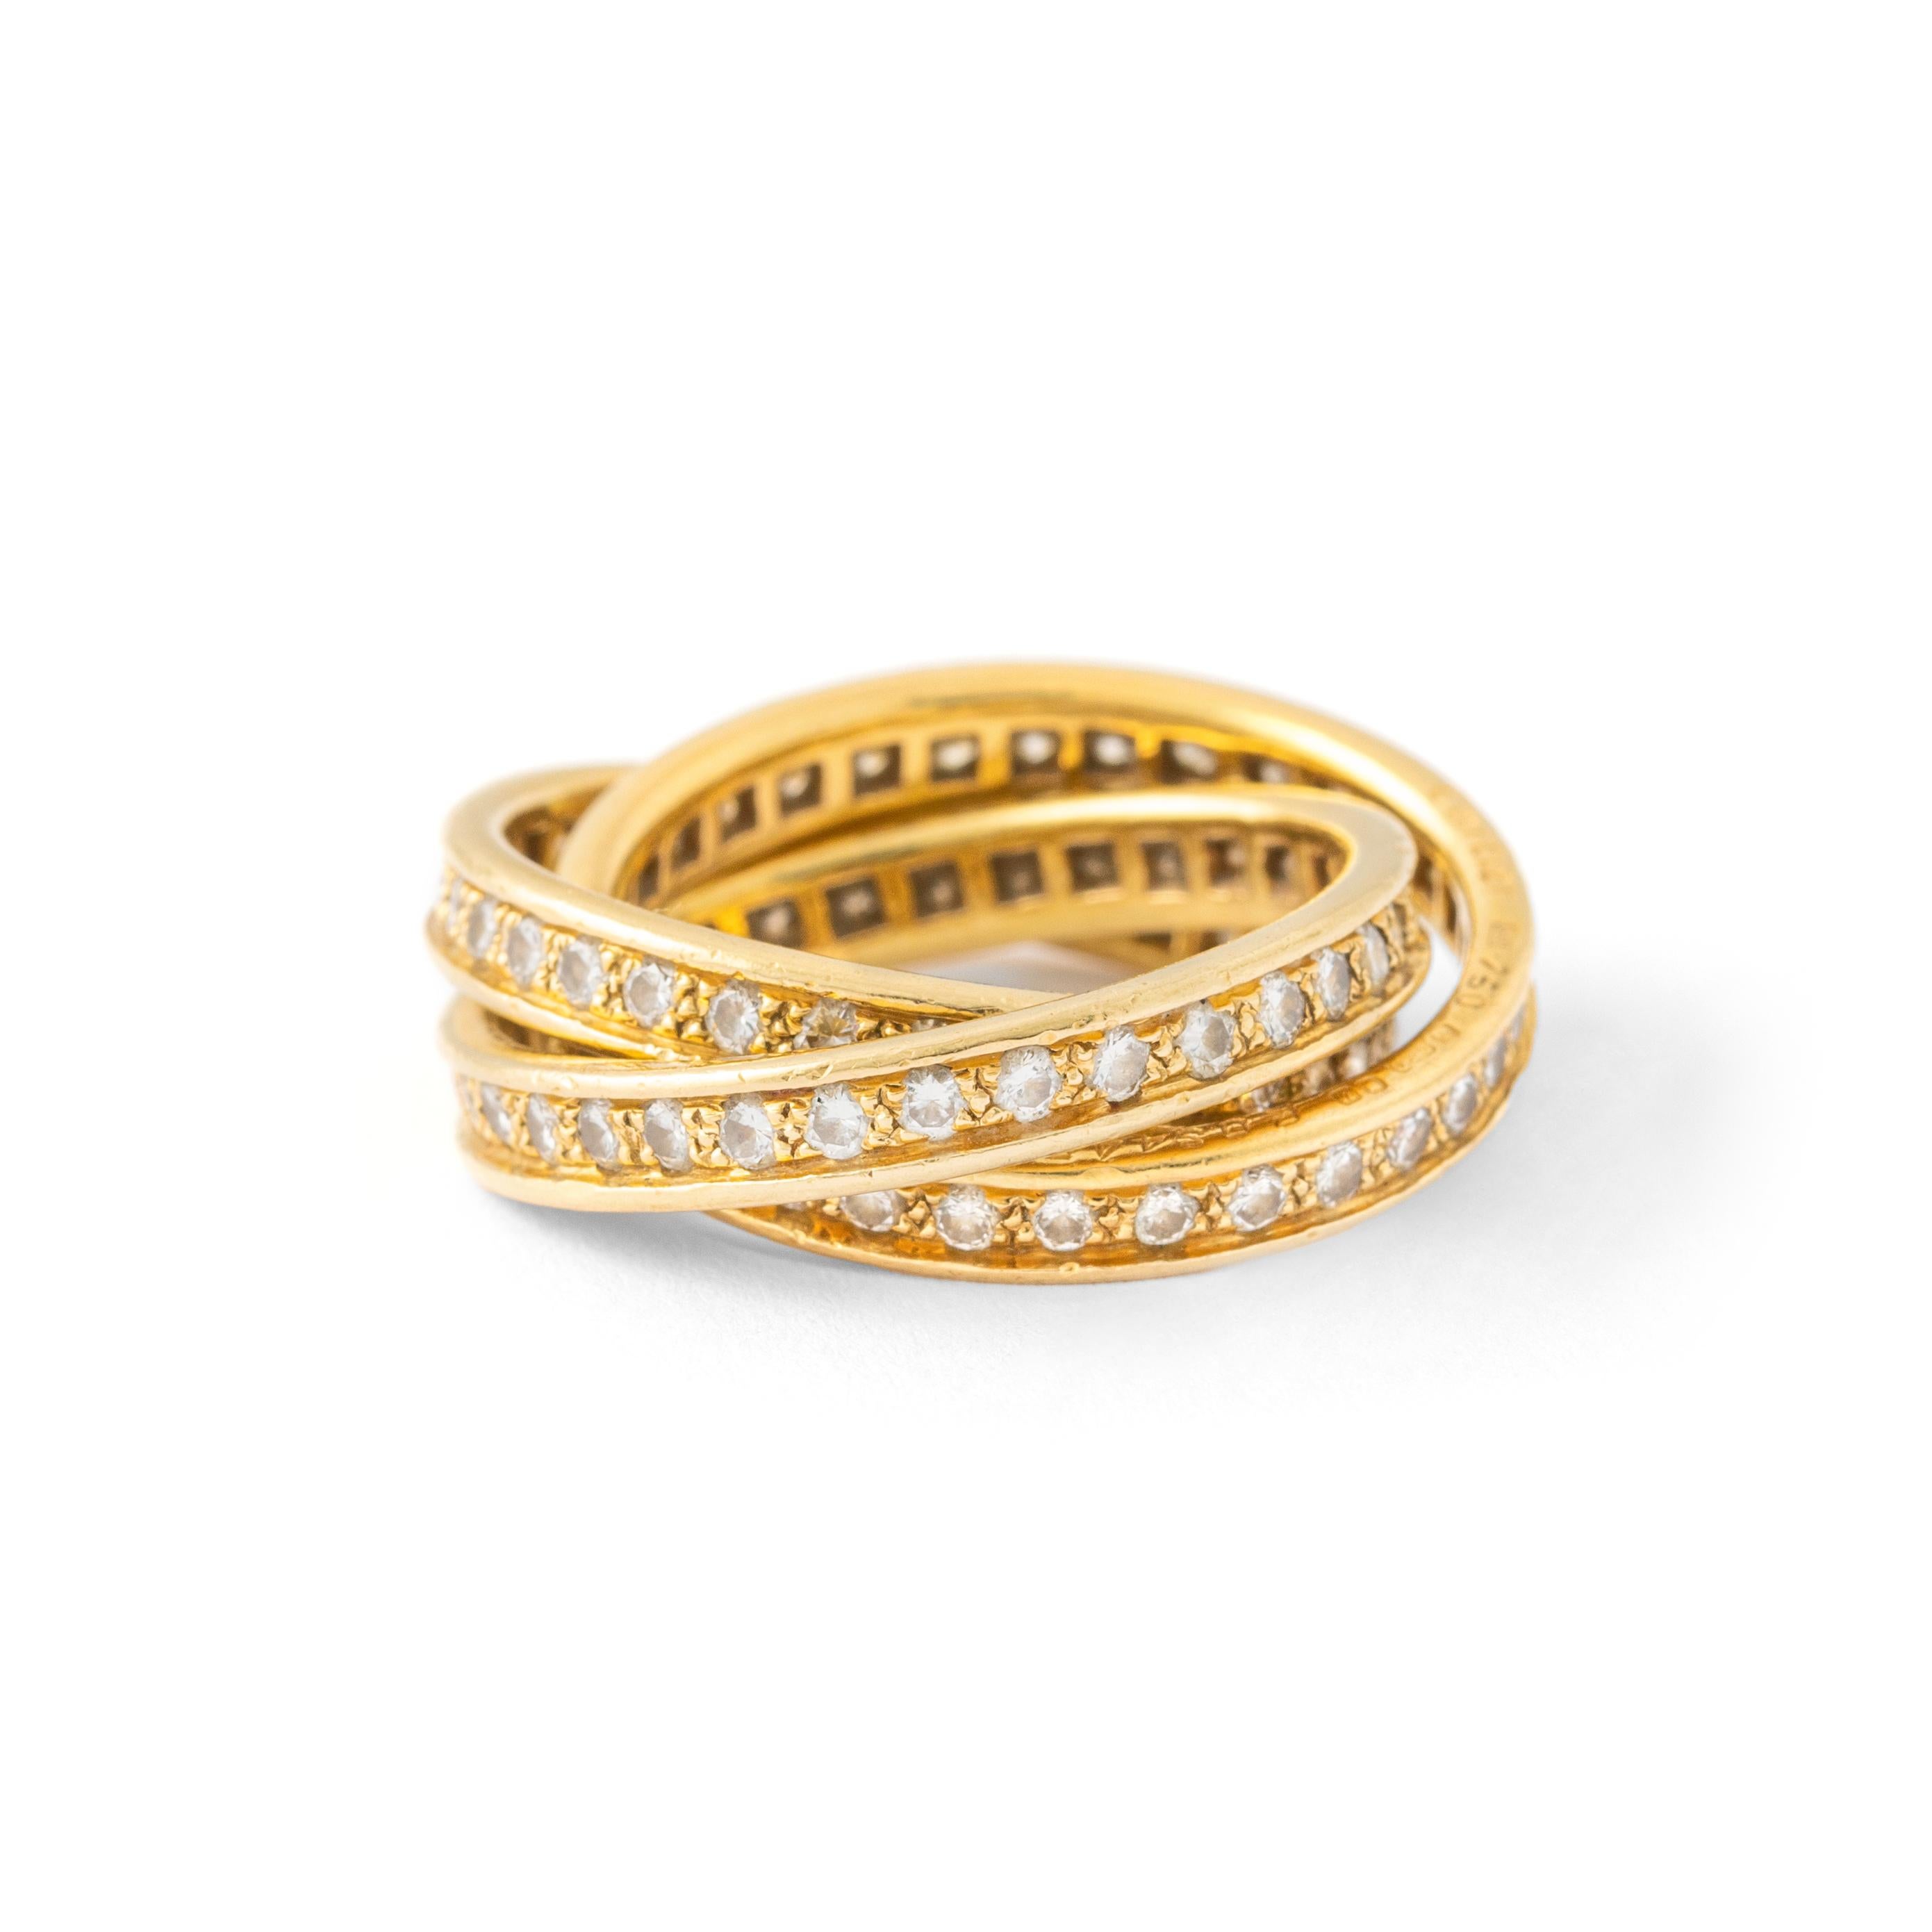 Gold Trinity ring set with brilliant cut diamonds. 
'Trinity', Cartier.
Interlocking movable intertwined yellow gold 18K bands, brilliant-cut diamonds, signed Cartier, numbered, French maker's and assay marks for gold.

A true 